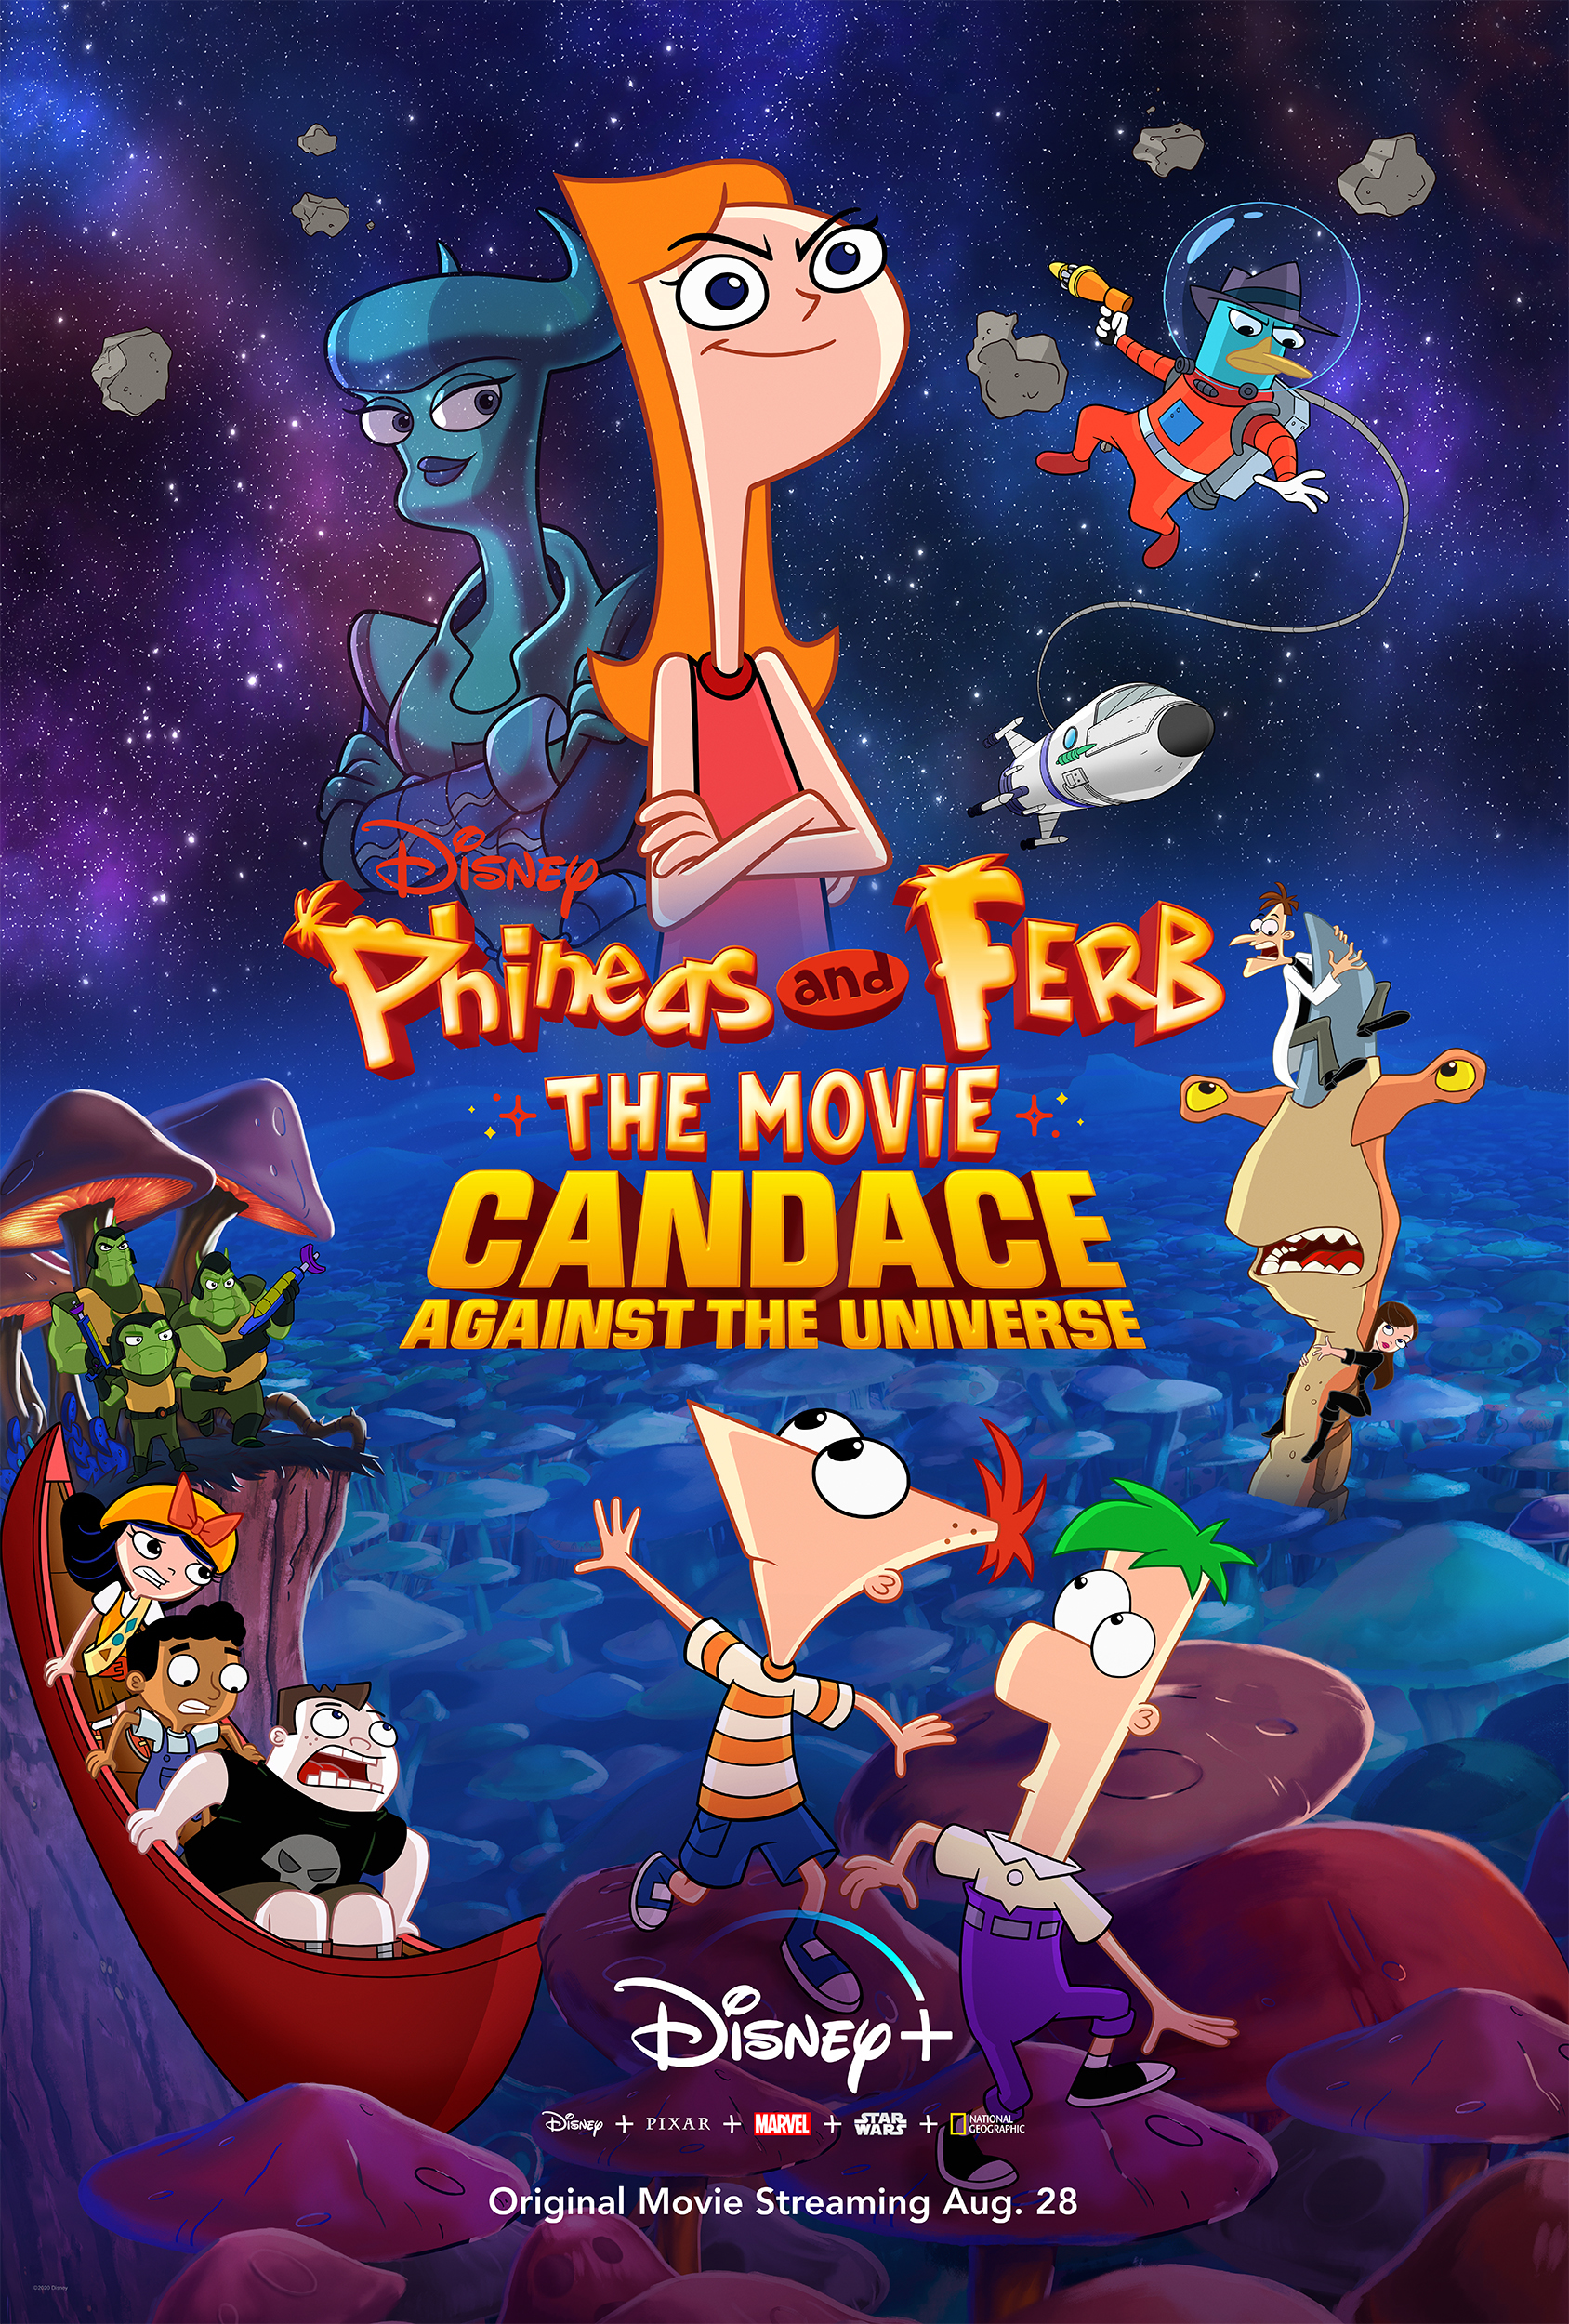 Phineas And Ferb The Movie Candace Against The Universe Phineas And Ferb Wiki Fandom - disneys phineas and ferb phineas and ferb theme song roblox music video